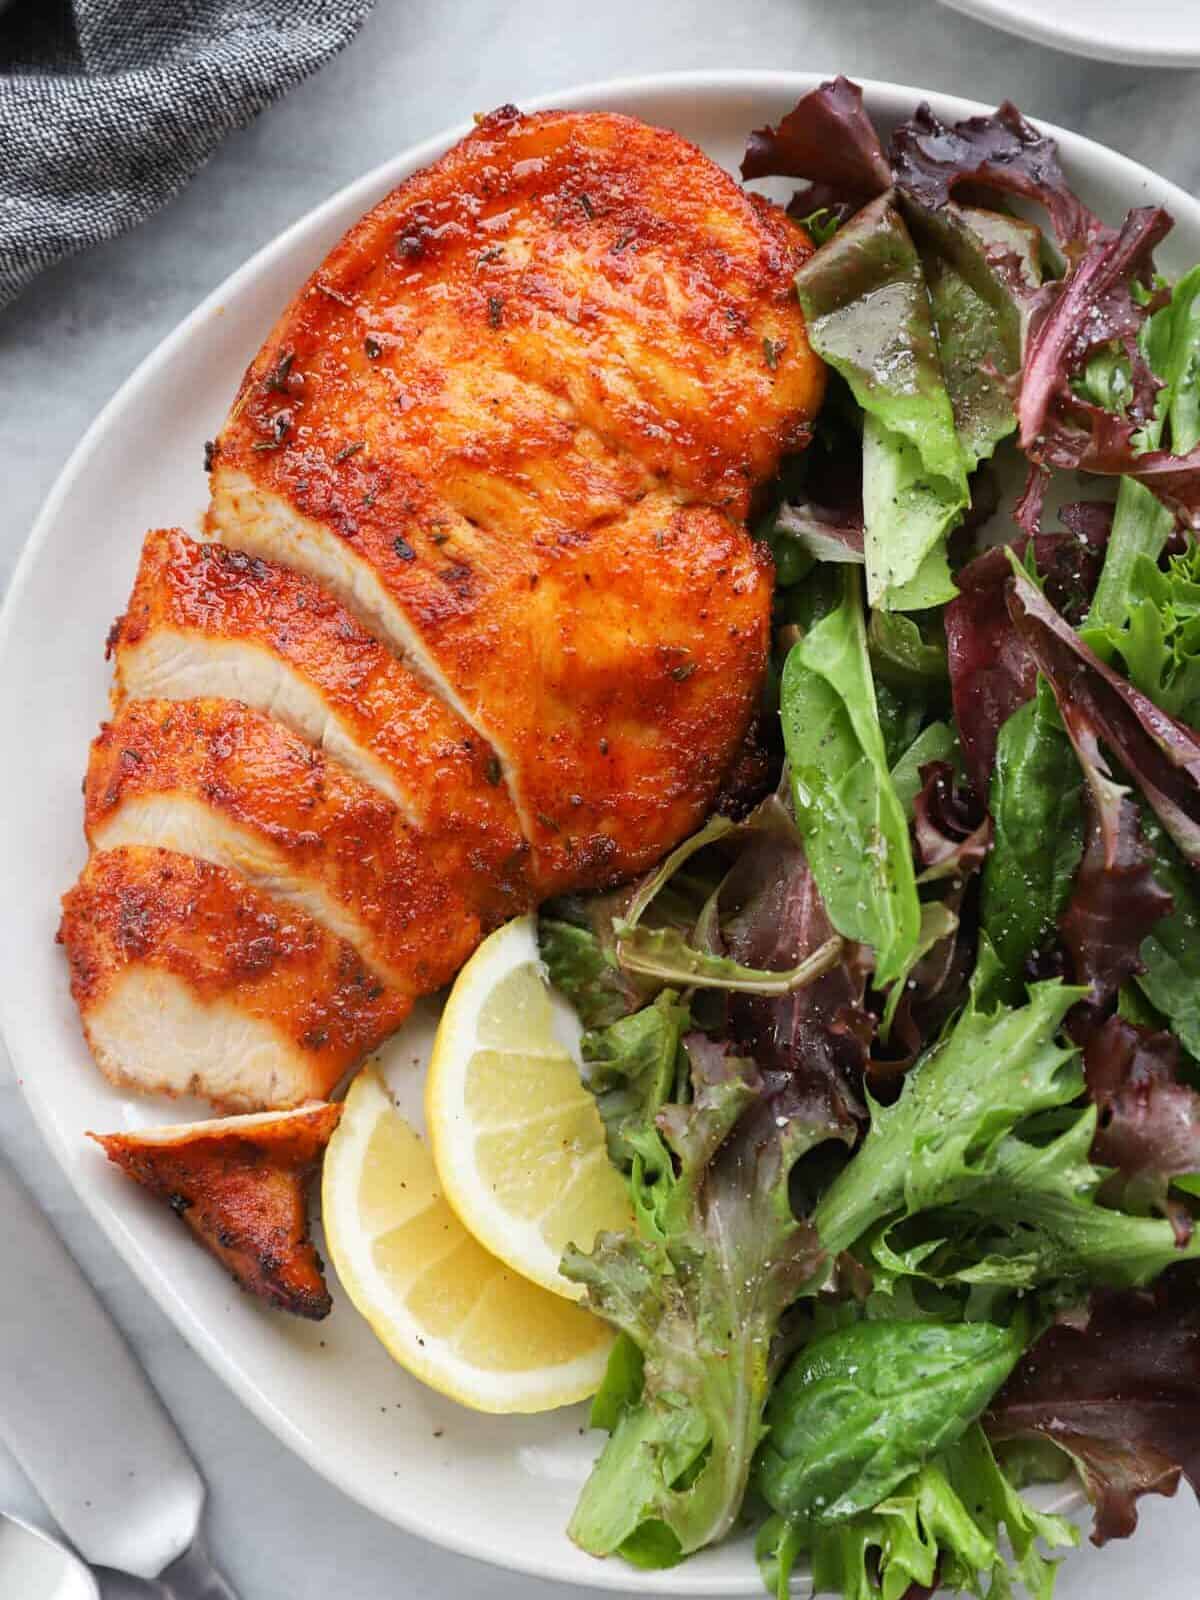 Air fryer chicken breast with brown sugar, paprika, and herbs